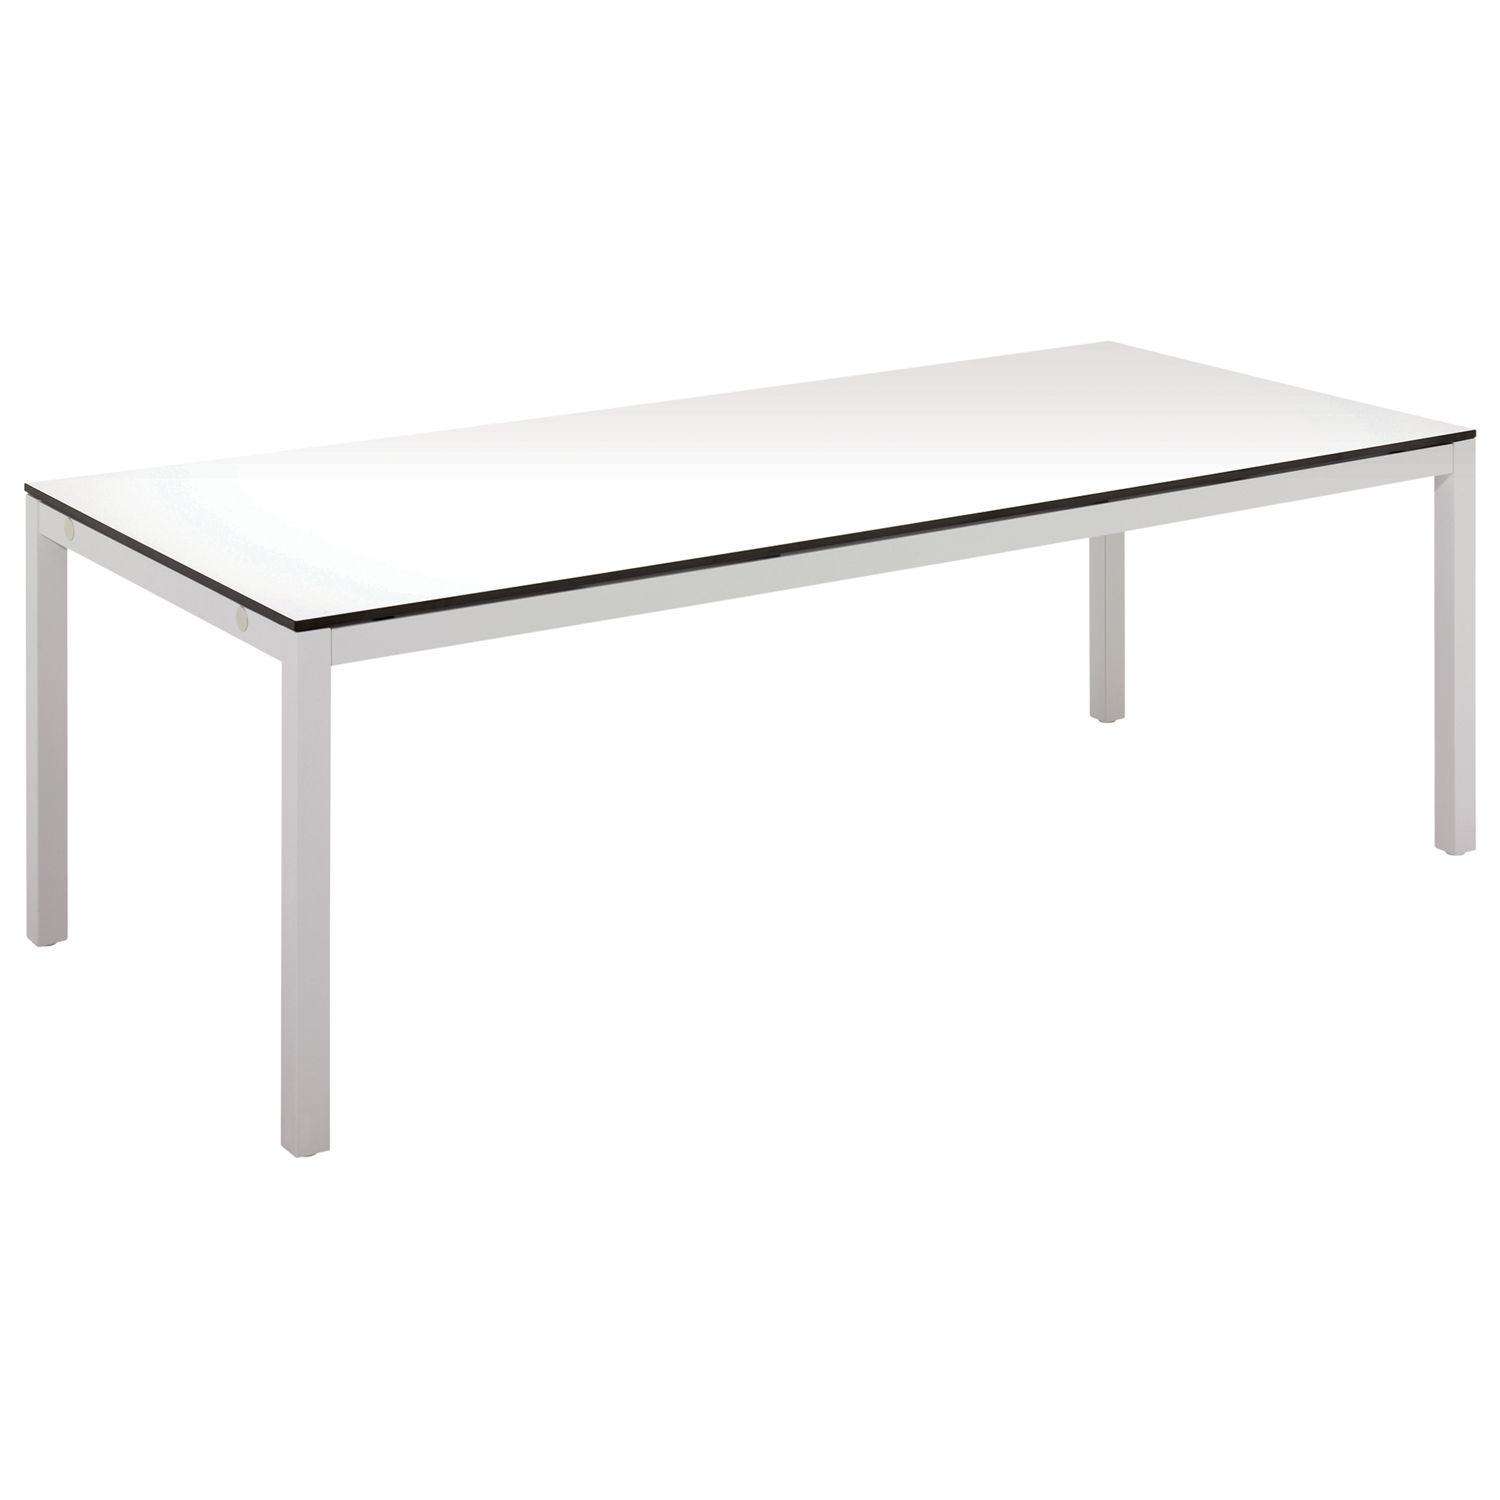 Gloster Roma Rectangular 8 Seater Outdoor Dining Table, Glass / Crystal White, width 220cm